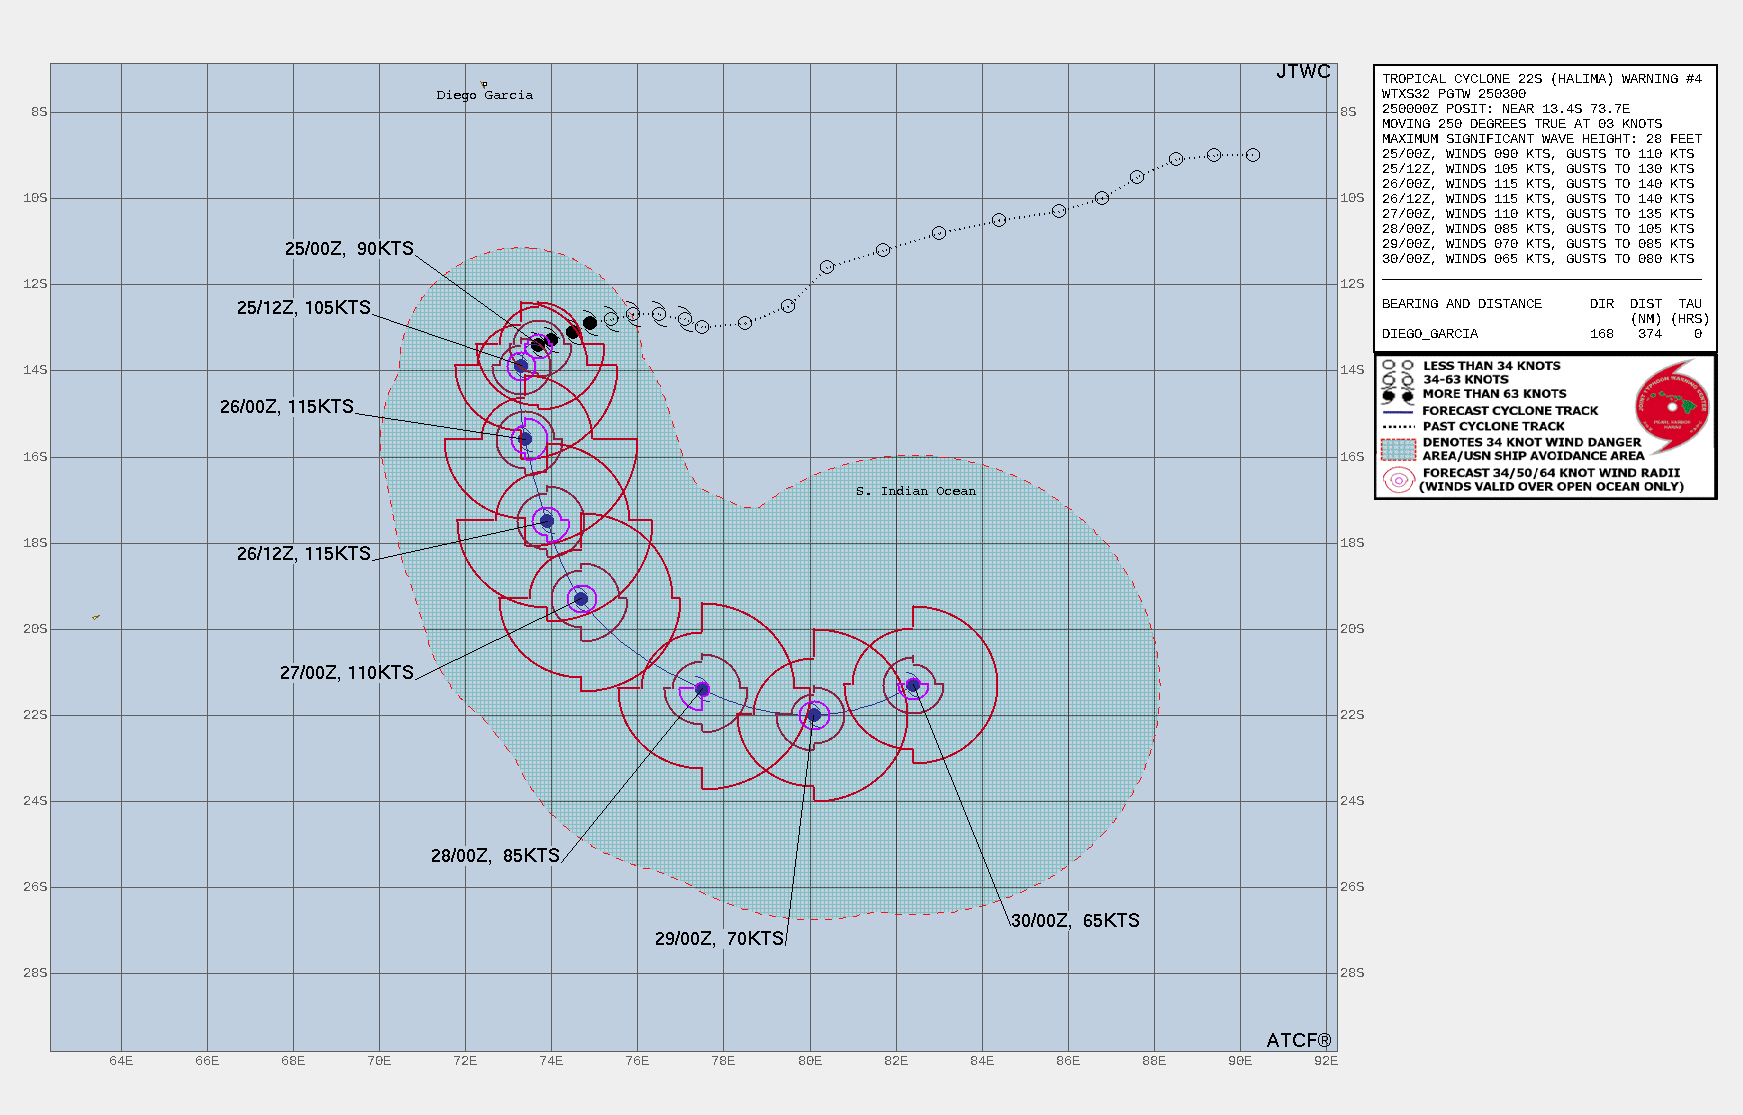 FORECAST REASONING.  SIGNIFICANT FORECAST CHANGES: THERE ARE NO SIGNIFICANT CHANGES TO THE FORECAST FROM THE PREVIOUS WARNING.  FORECAST DISCUSSION: OVER THE PAST TWELVE HOURS TC 22S HAS SLOWED SIGNIFICANTLY, WITH THE MOTION VECTOR AROUND THREE TO FOUR KNOTS TOWARDS THE WEST AT ANALYSIS TIME UNDER COMPETING STEERING INFLUENCES BETWEEN THE SUBTROPICAL RIDGE (STR) TO THE WEST AND A NEAR EQUATORIAL RIDGE (NER) COMPLEX TO THE EAST. THE STR TO THE WEST IS FORECAST TO ERODE AND MOVE FURTHER TO THE WEST IN THE NEAR-TERM, WITH A MERIDIONAL NER-STR COMPLEX TO THE EAST ASSUMING THE DOMINANT STEERING ROLE. TC 22S IS FORECAST TO TURN POLEWARD BY 12H, AND BEGIN TO ACCELERATE AS IT MOVES ALONG AN INCREASINGLY TIGHT GRADIENT BETWEEN THE STEERING RIDGE AND  A NORTH-ORIENTED UPPER-LEVEL TROUGH. BY 72H THE SYSTEM WILL TURN EASTWARD AS THE NER TO THE NORTH MOVES TO A POSITION DUE NORTH OF THE SYSTEM AND A STRONG LOW TO MID-LEVEL STR BUILDS IN TO THE SOUTHEAST AND EFFECTIVELY BLOCKS ANY FURTHER POLEWARD MOVEMENT. BY THE END OF THE FORECAST THE TRACK WILL BECOME MORE ERRATIC, POTENTIALLY LOOPING FIRST EQUATORWARD THEN POLEWARD AS IT ONCE AGAIN MOVES INTO A WEAK STEERING PATTERN. THE ENVIRONMENT IS ABOUT AS OPTIMUM FOR INTENSIFICATION AS IT COULD BE, WITH VERY LOW SHEAR, VERY WARM SSTS AND ROBUST RADIAL OUTFLOW. RECENT EIR SUGGESTS THE EYE MAY FINALLY BE ESTABLISHING ITSELF, AND THE RECENT BURST OF LIGHTNING ACTIVITY SUGGESTS THE IMMINENT ONSET OF ANOTHER ROUND OF POTENTIALLY RAPID INTENSIFICATION, TO A PEAK OF 115 KNOTS/CAT 4 US, THOUGH IT IS POSSIBLE THAT THE ULTIMATE PEAK COULD BE CLOSER TO 125 KNOTS, ESPECIALLY IF THE EYE CAN CLEAR OUT AND WARM SIGNIFICANTLY. THE OPTIMUM ENVIRONMENTAL CONDITIONS SHOULD PERSIST FOR ABOUT 24 TO 36 HOURS BEFORE INCREASING SHEAR AND DECREASING OUTFLOW ALOFT WILL CONSPIRE TO WEAKEN THE SYSTEM SIGNIFICANTLY. ENVIRONMENTAL CONDITIONS LEVEL OFF AS THE SYSTEM TRACKS EASTWARD AFTER 72H, AND WHILE NOT AS OPTIMUM, WILL SUPPORT MAINTENANCE OF A TYPHOON STRENGTH SYSTEM THROUGH THE END OF THE FORECAST.